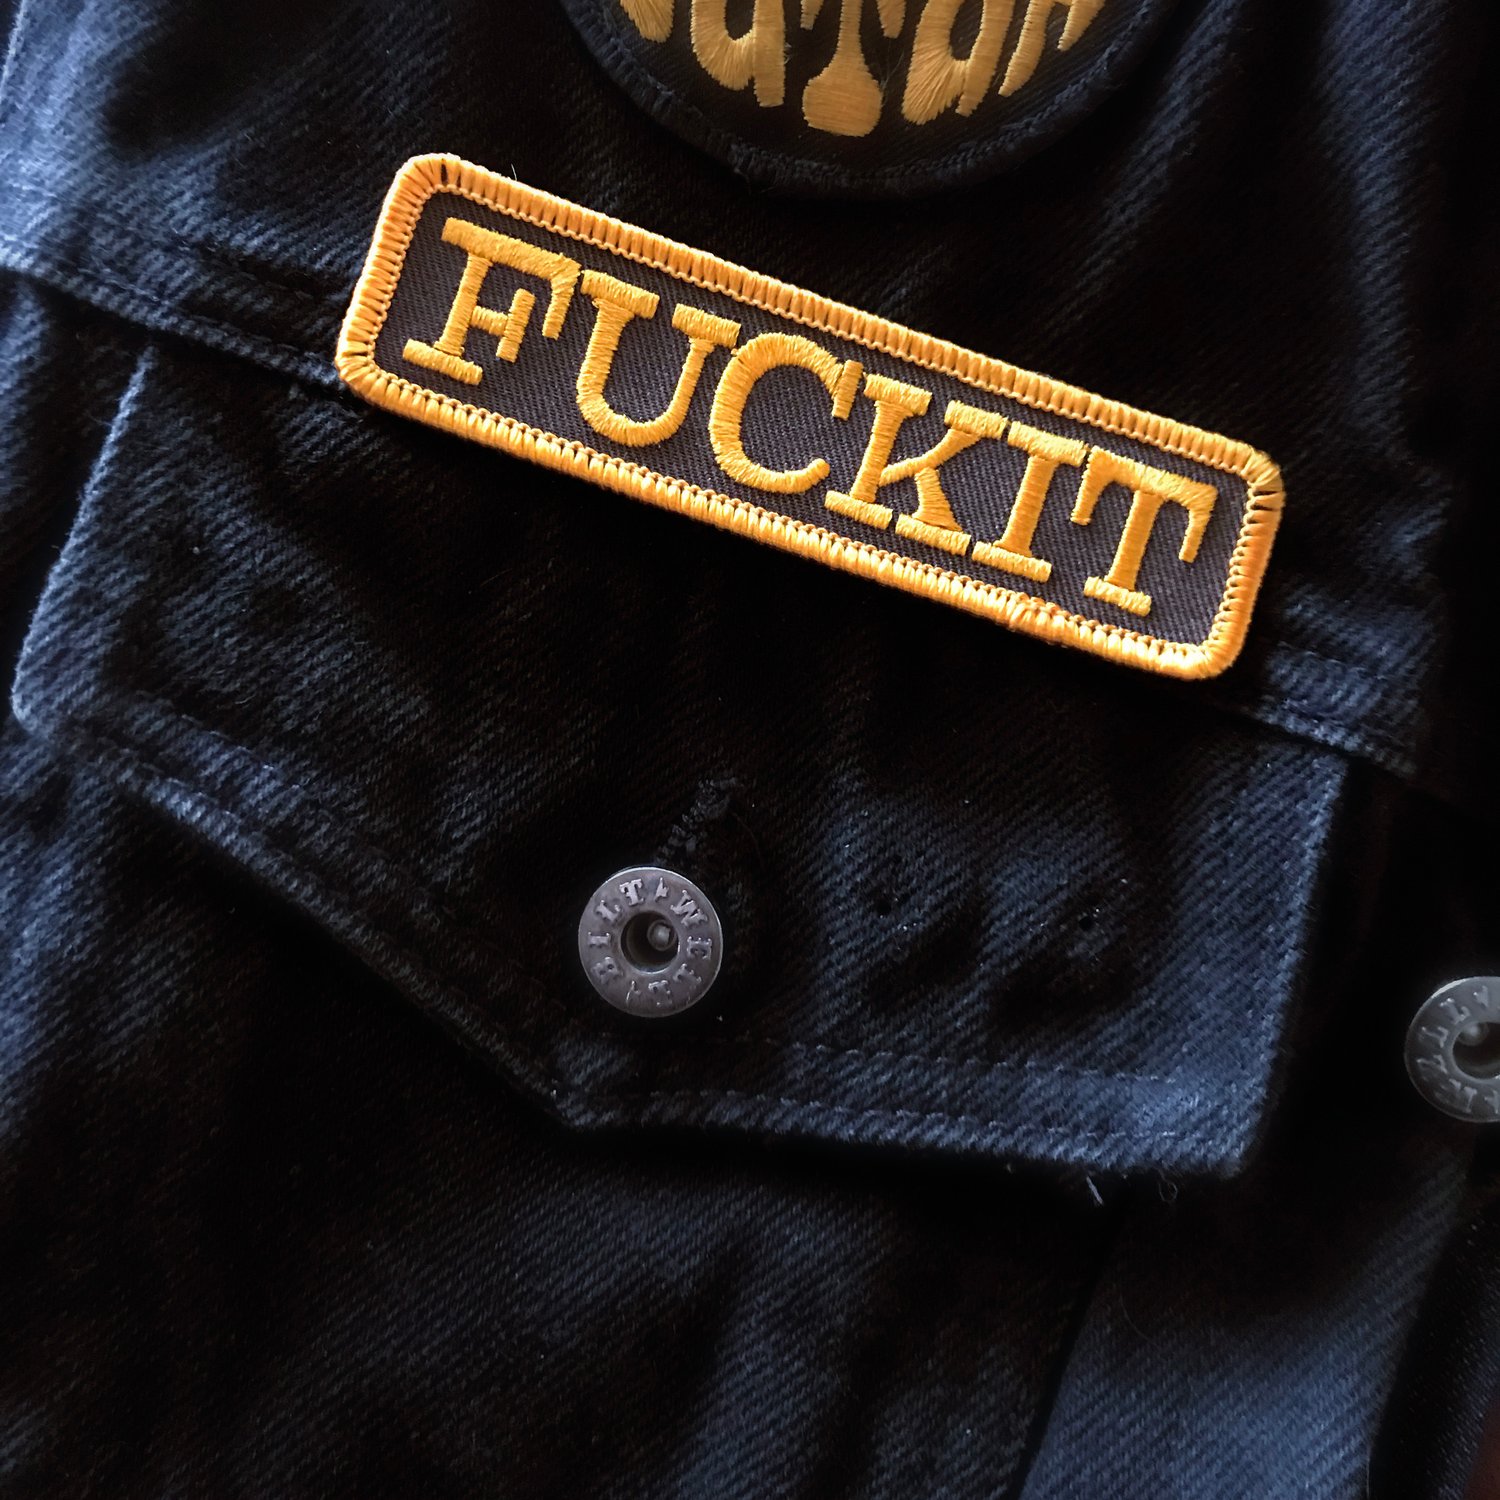 Image of 'Fuckit' patches